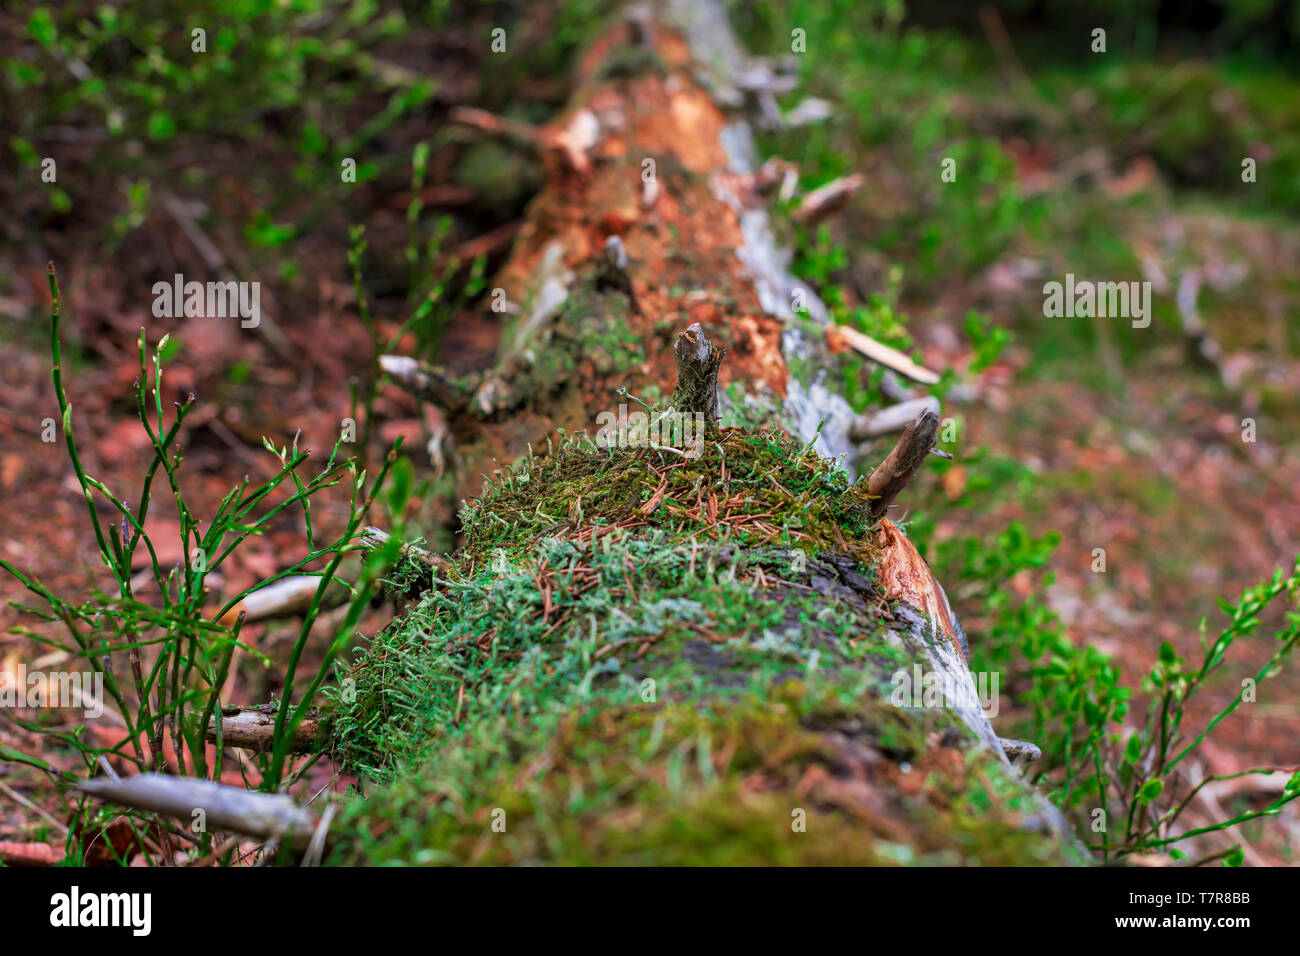 Close-up with a rotten tree trunk lying on the ground covered in lichens. Stock Photo